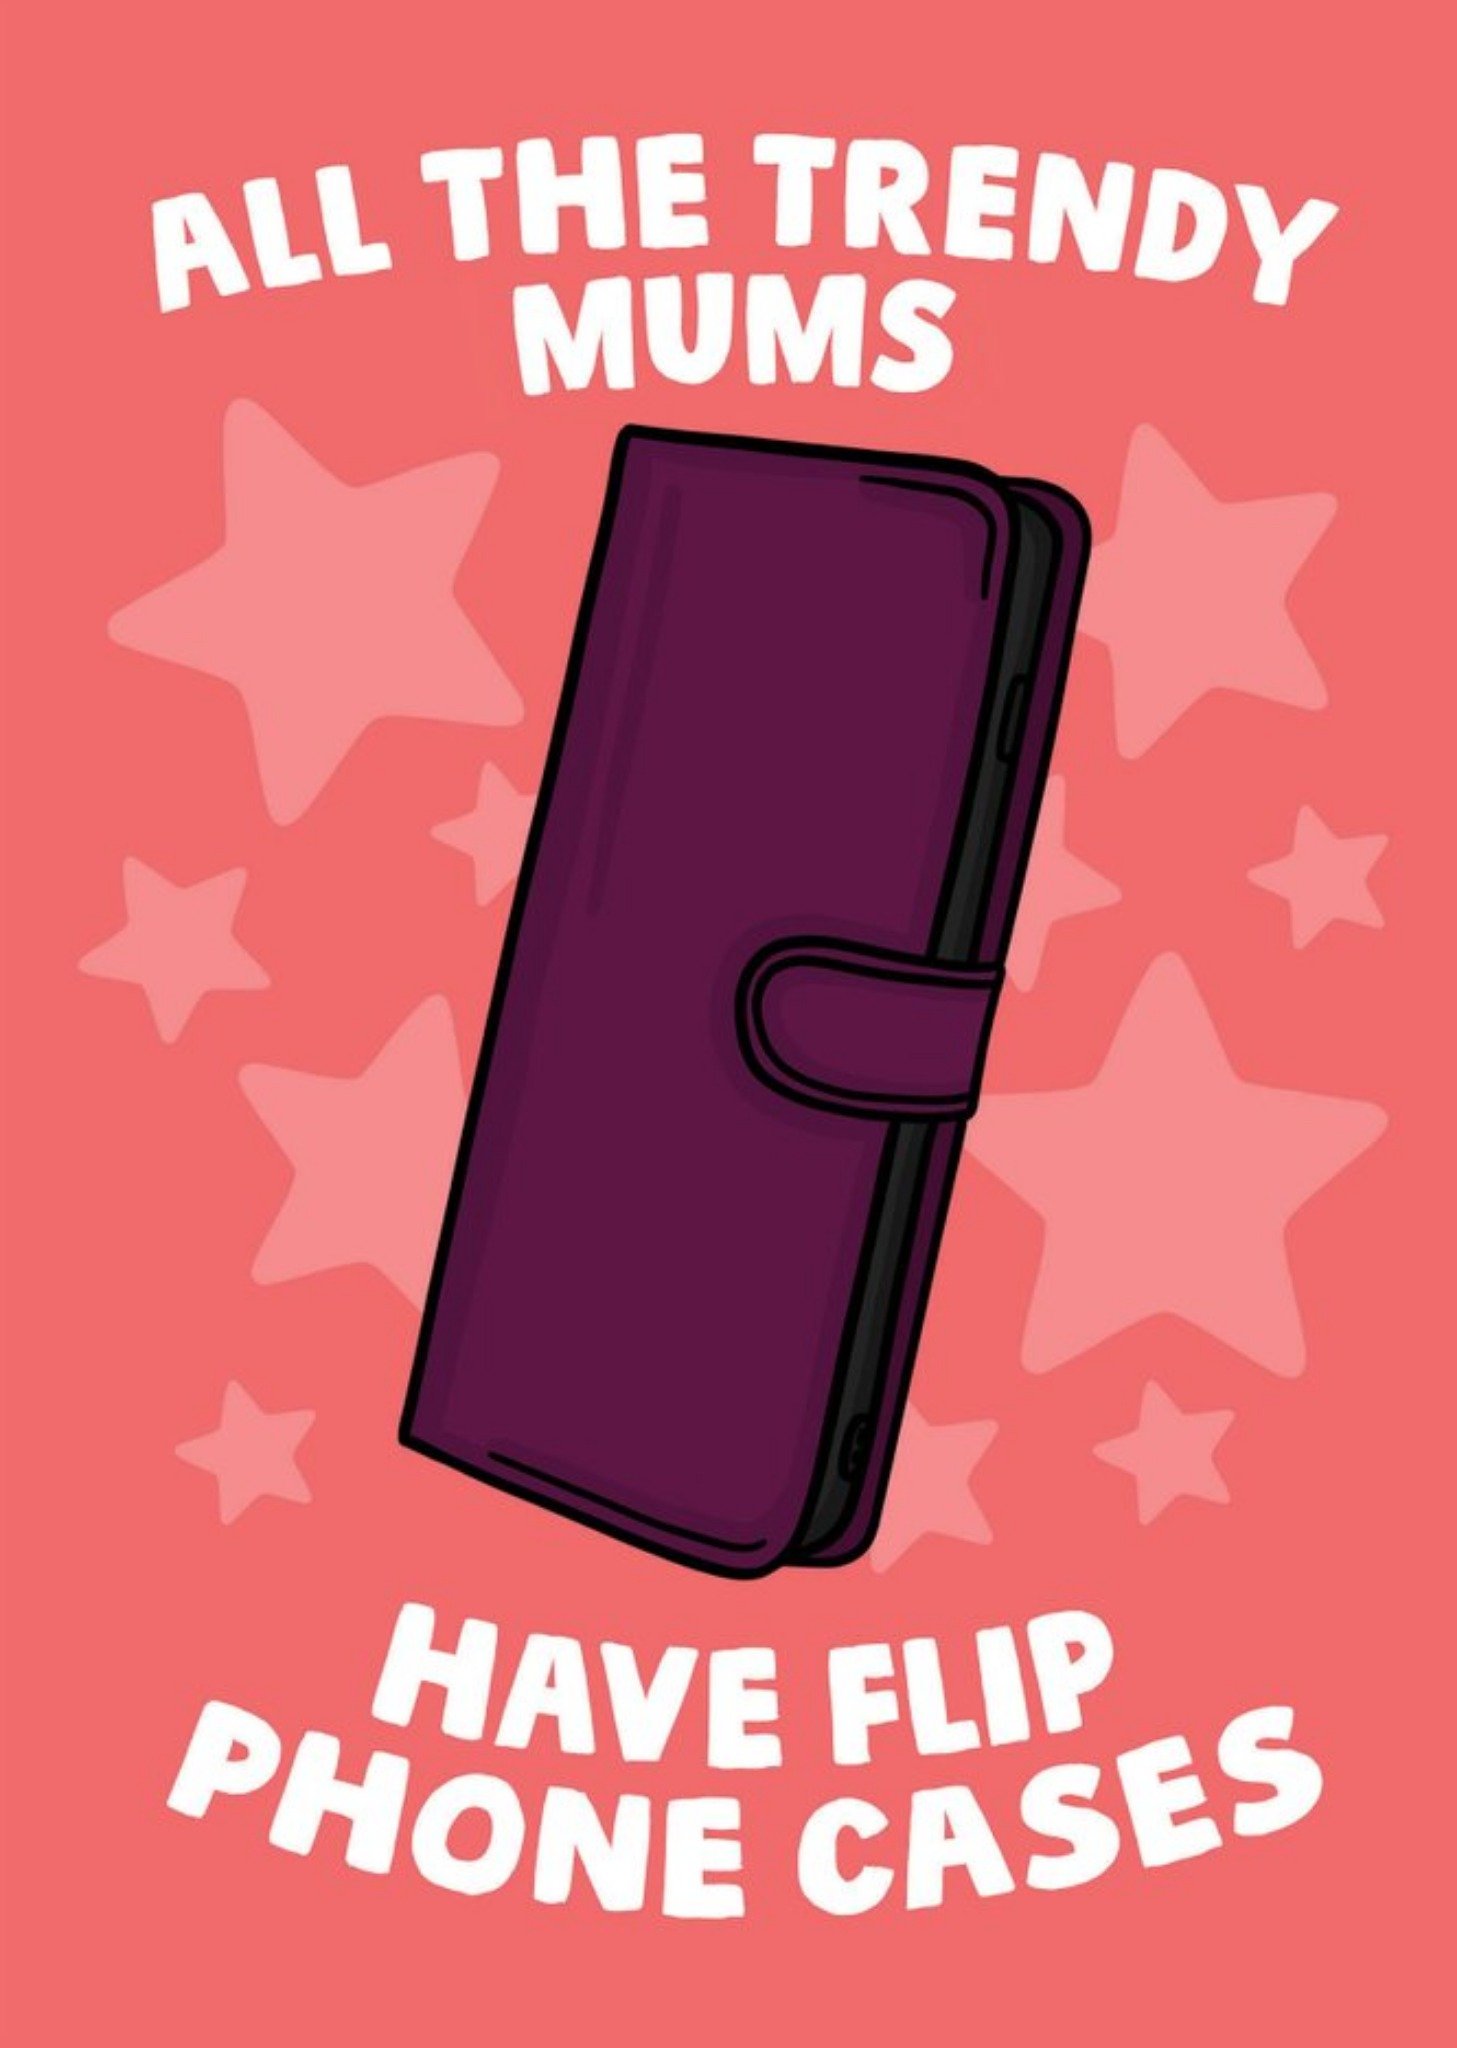 Moonpig Izzy Likes To Doodle Illustrated Funny Mobile Case Mother's Day Card, Large